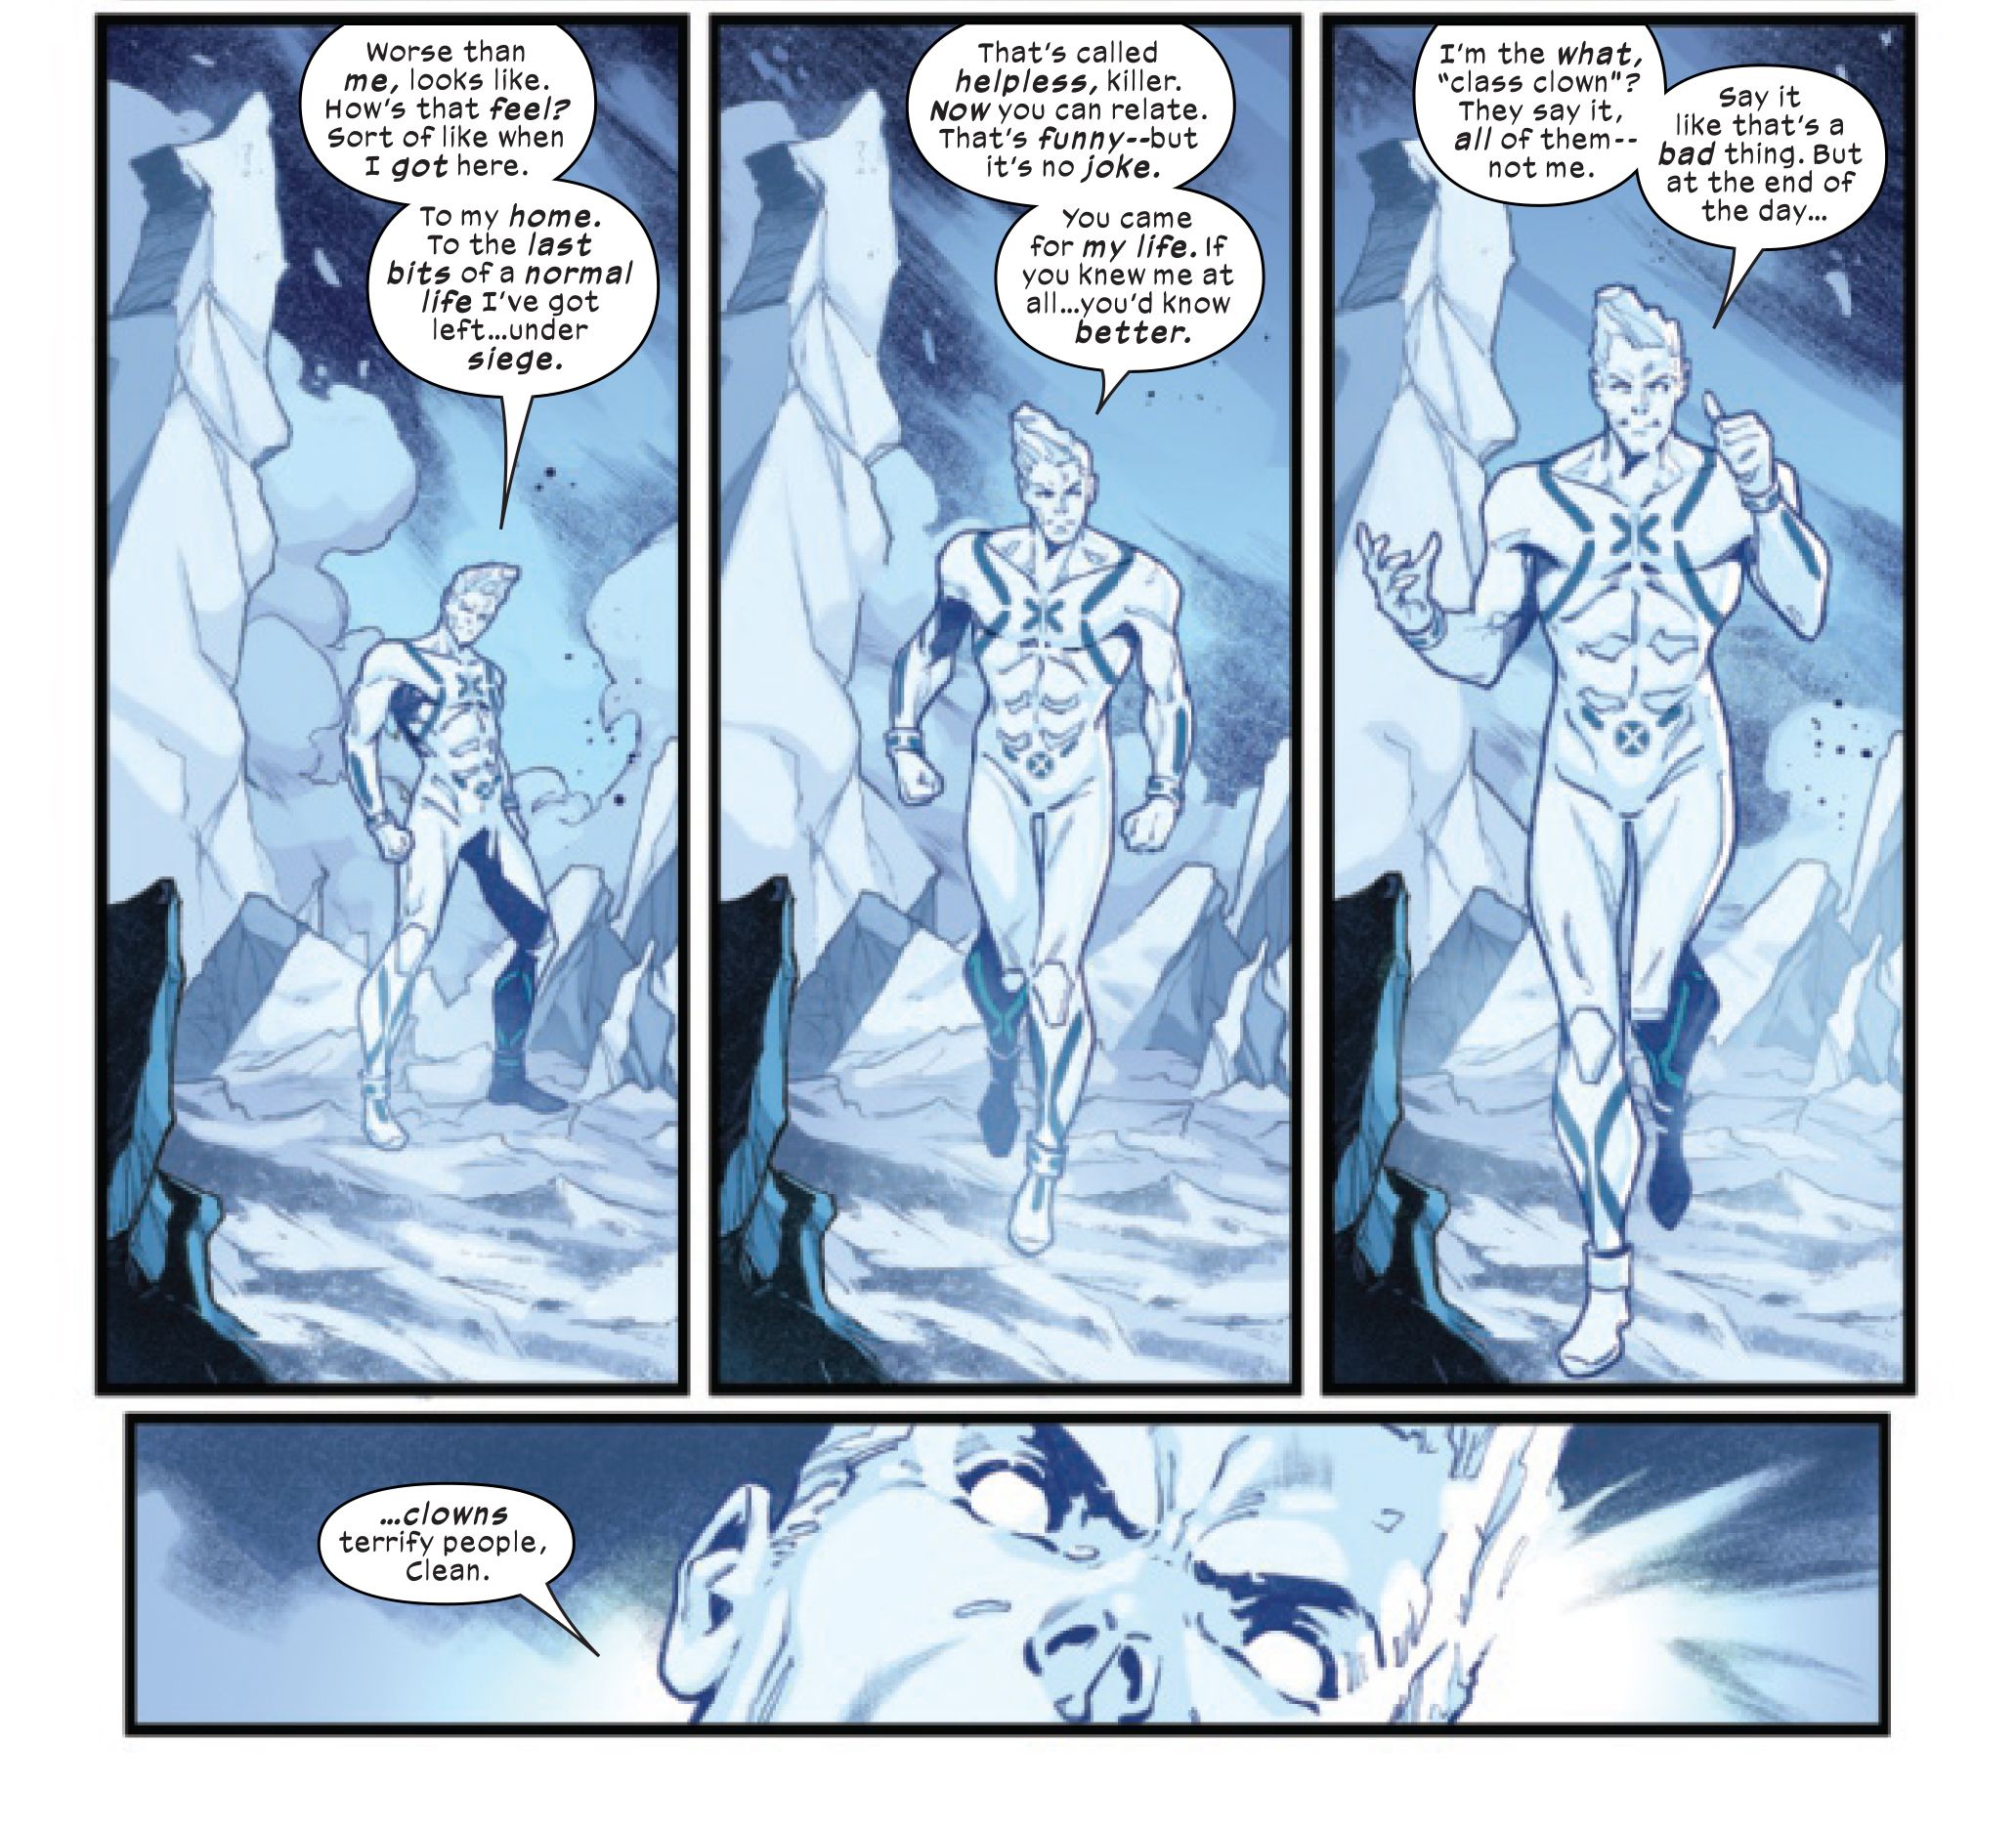 Astonishing Iceman #5 Page 14, Iceman admits to being a class clown, but adds 